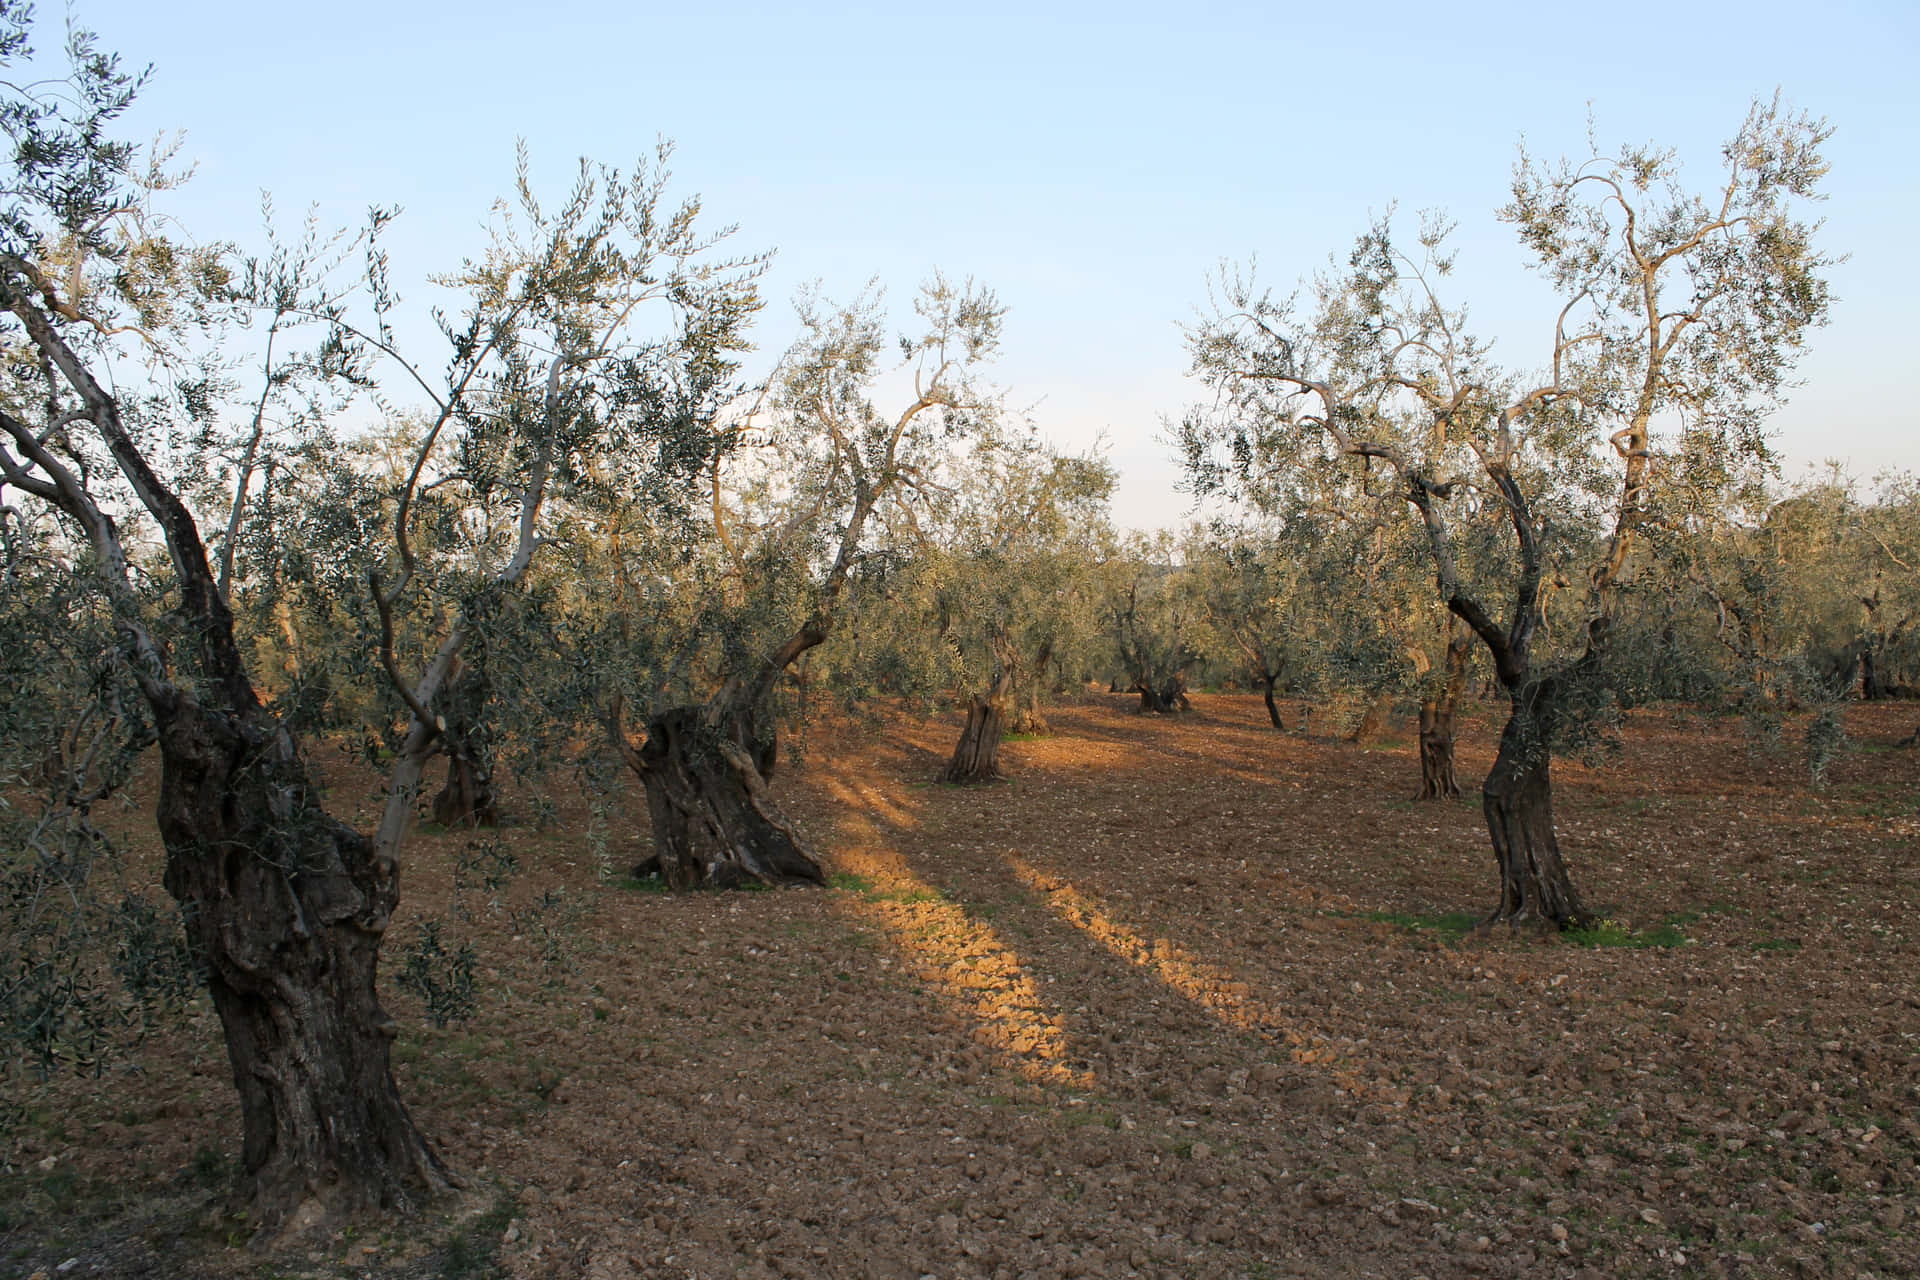 "The beauty of an ancient olive tree" Wallpaper